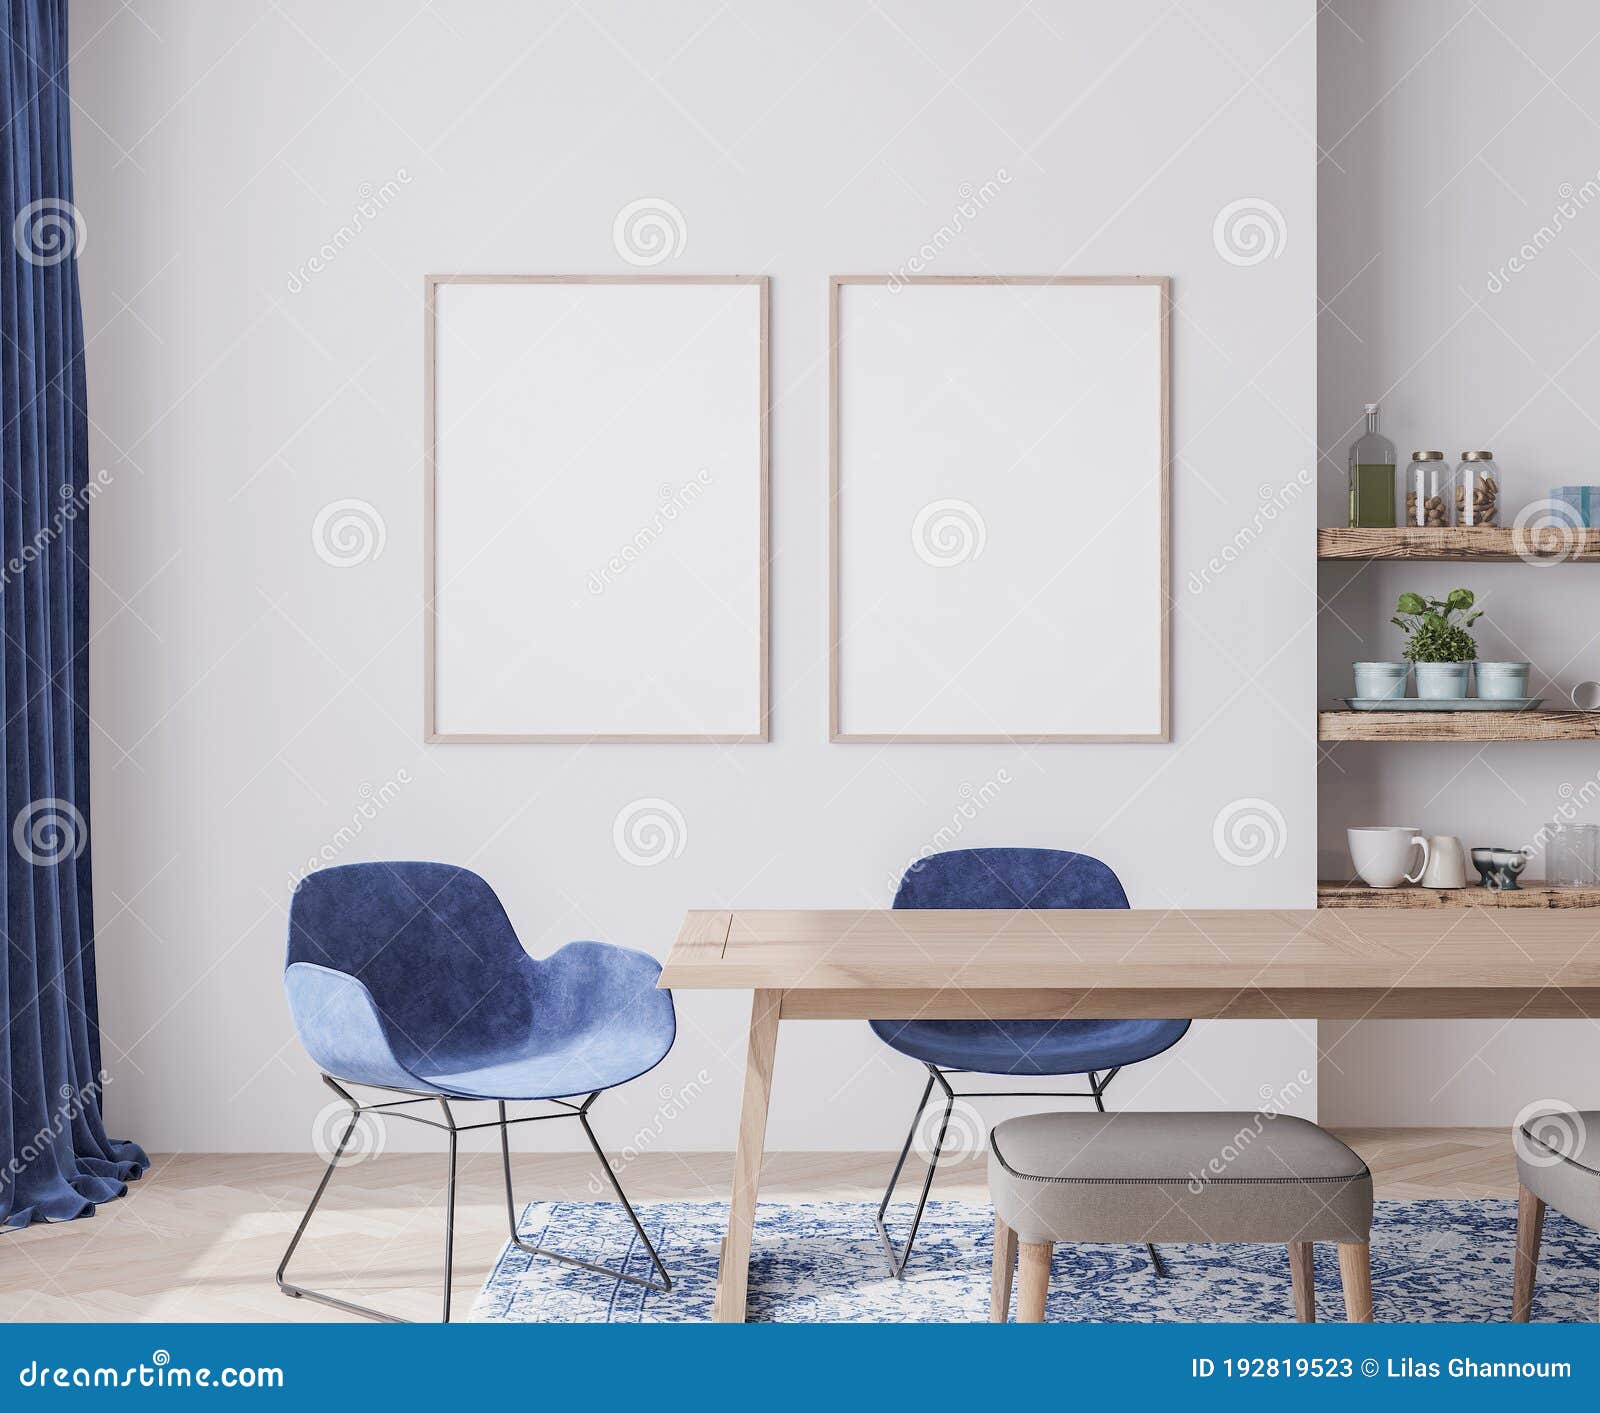 mock up poster frame, interior  for dining room with velvet blue chairs,